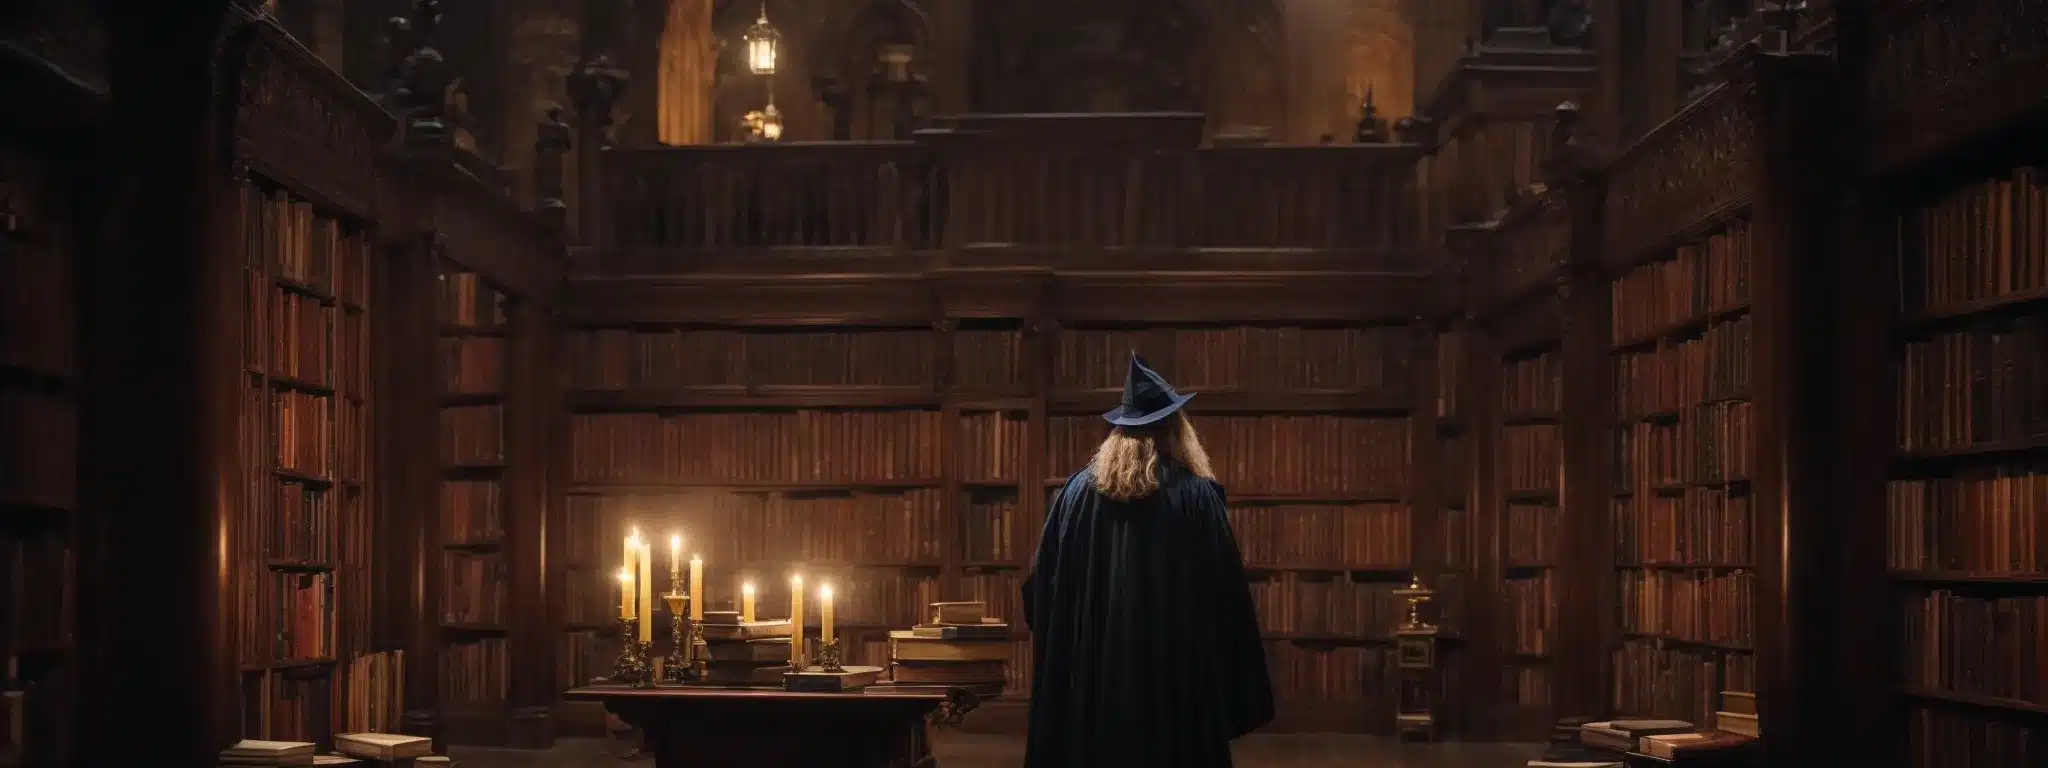 A Wizard Stands Before A Grand Library With Books Symbolizing Website Components, Each Glowing With A Potential Upgrade Spell.